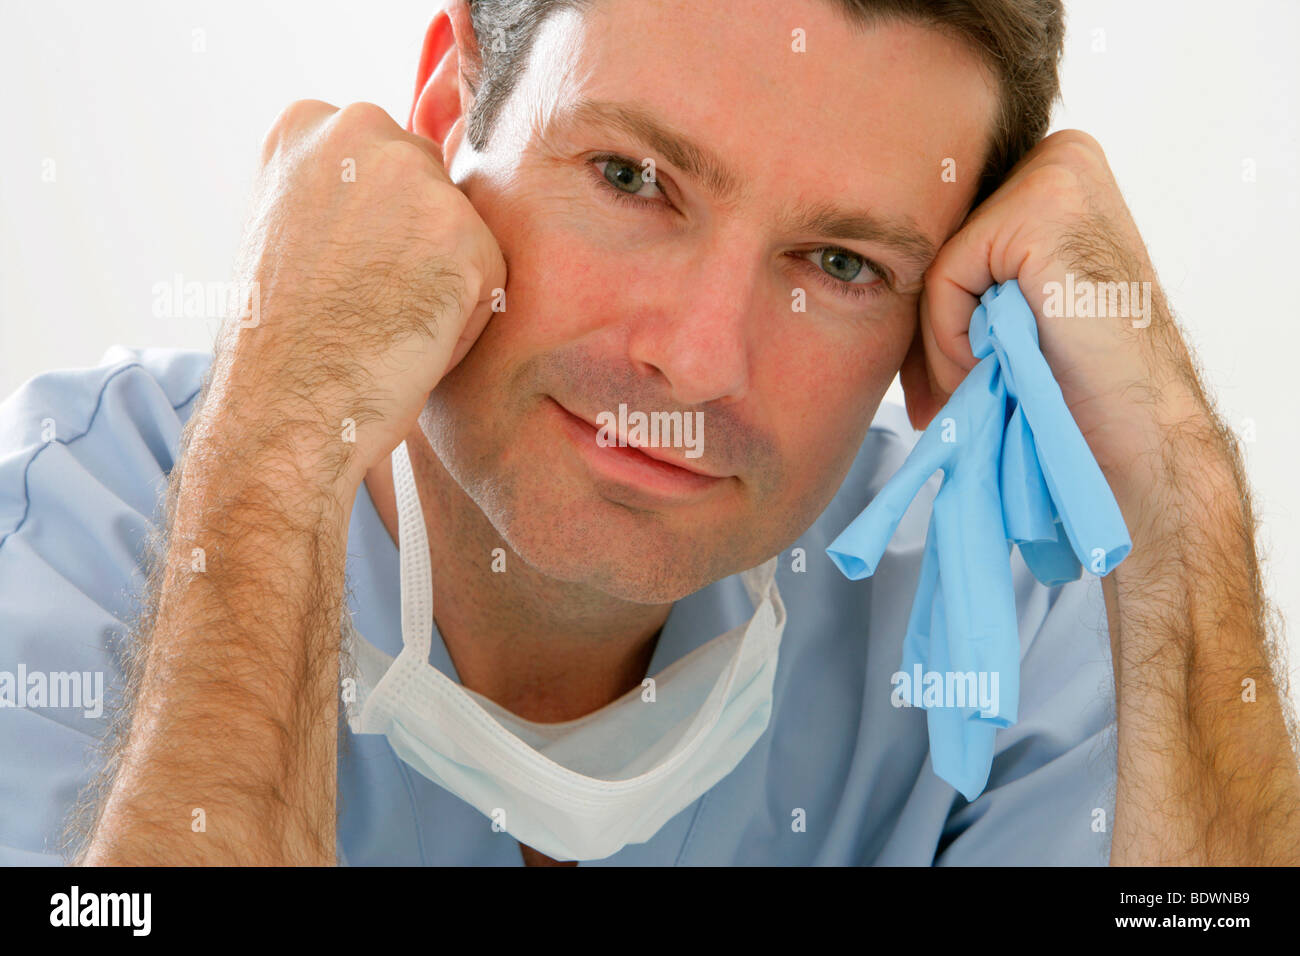 TIRED DOCTOR Stock Photo